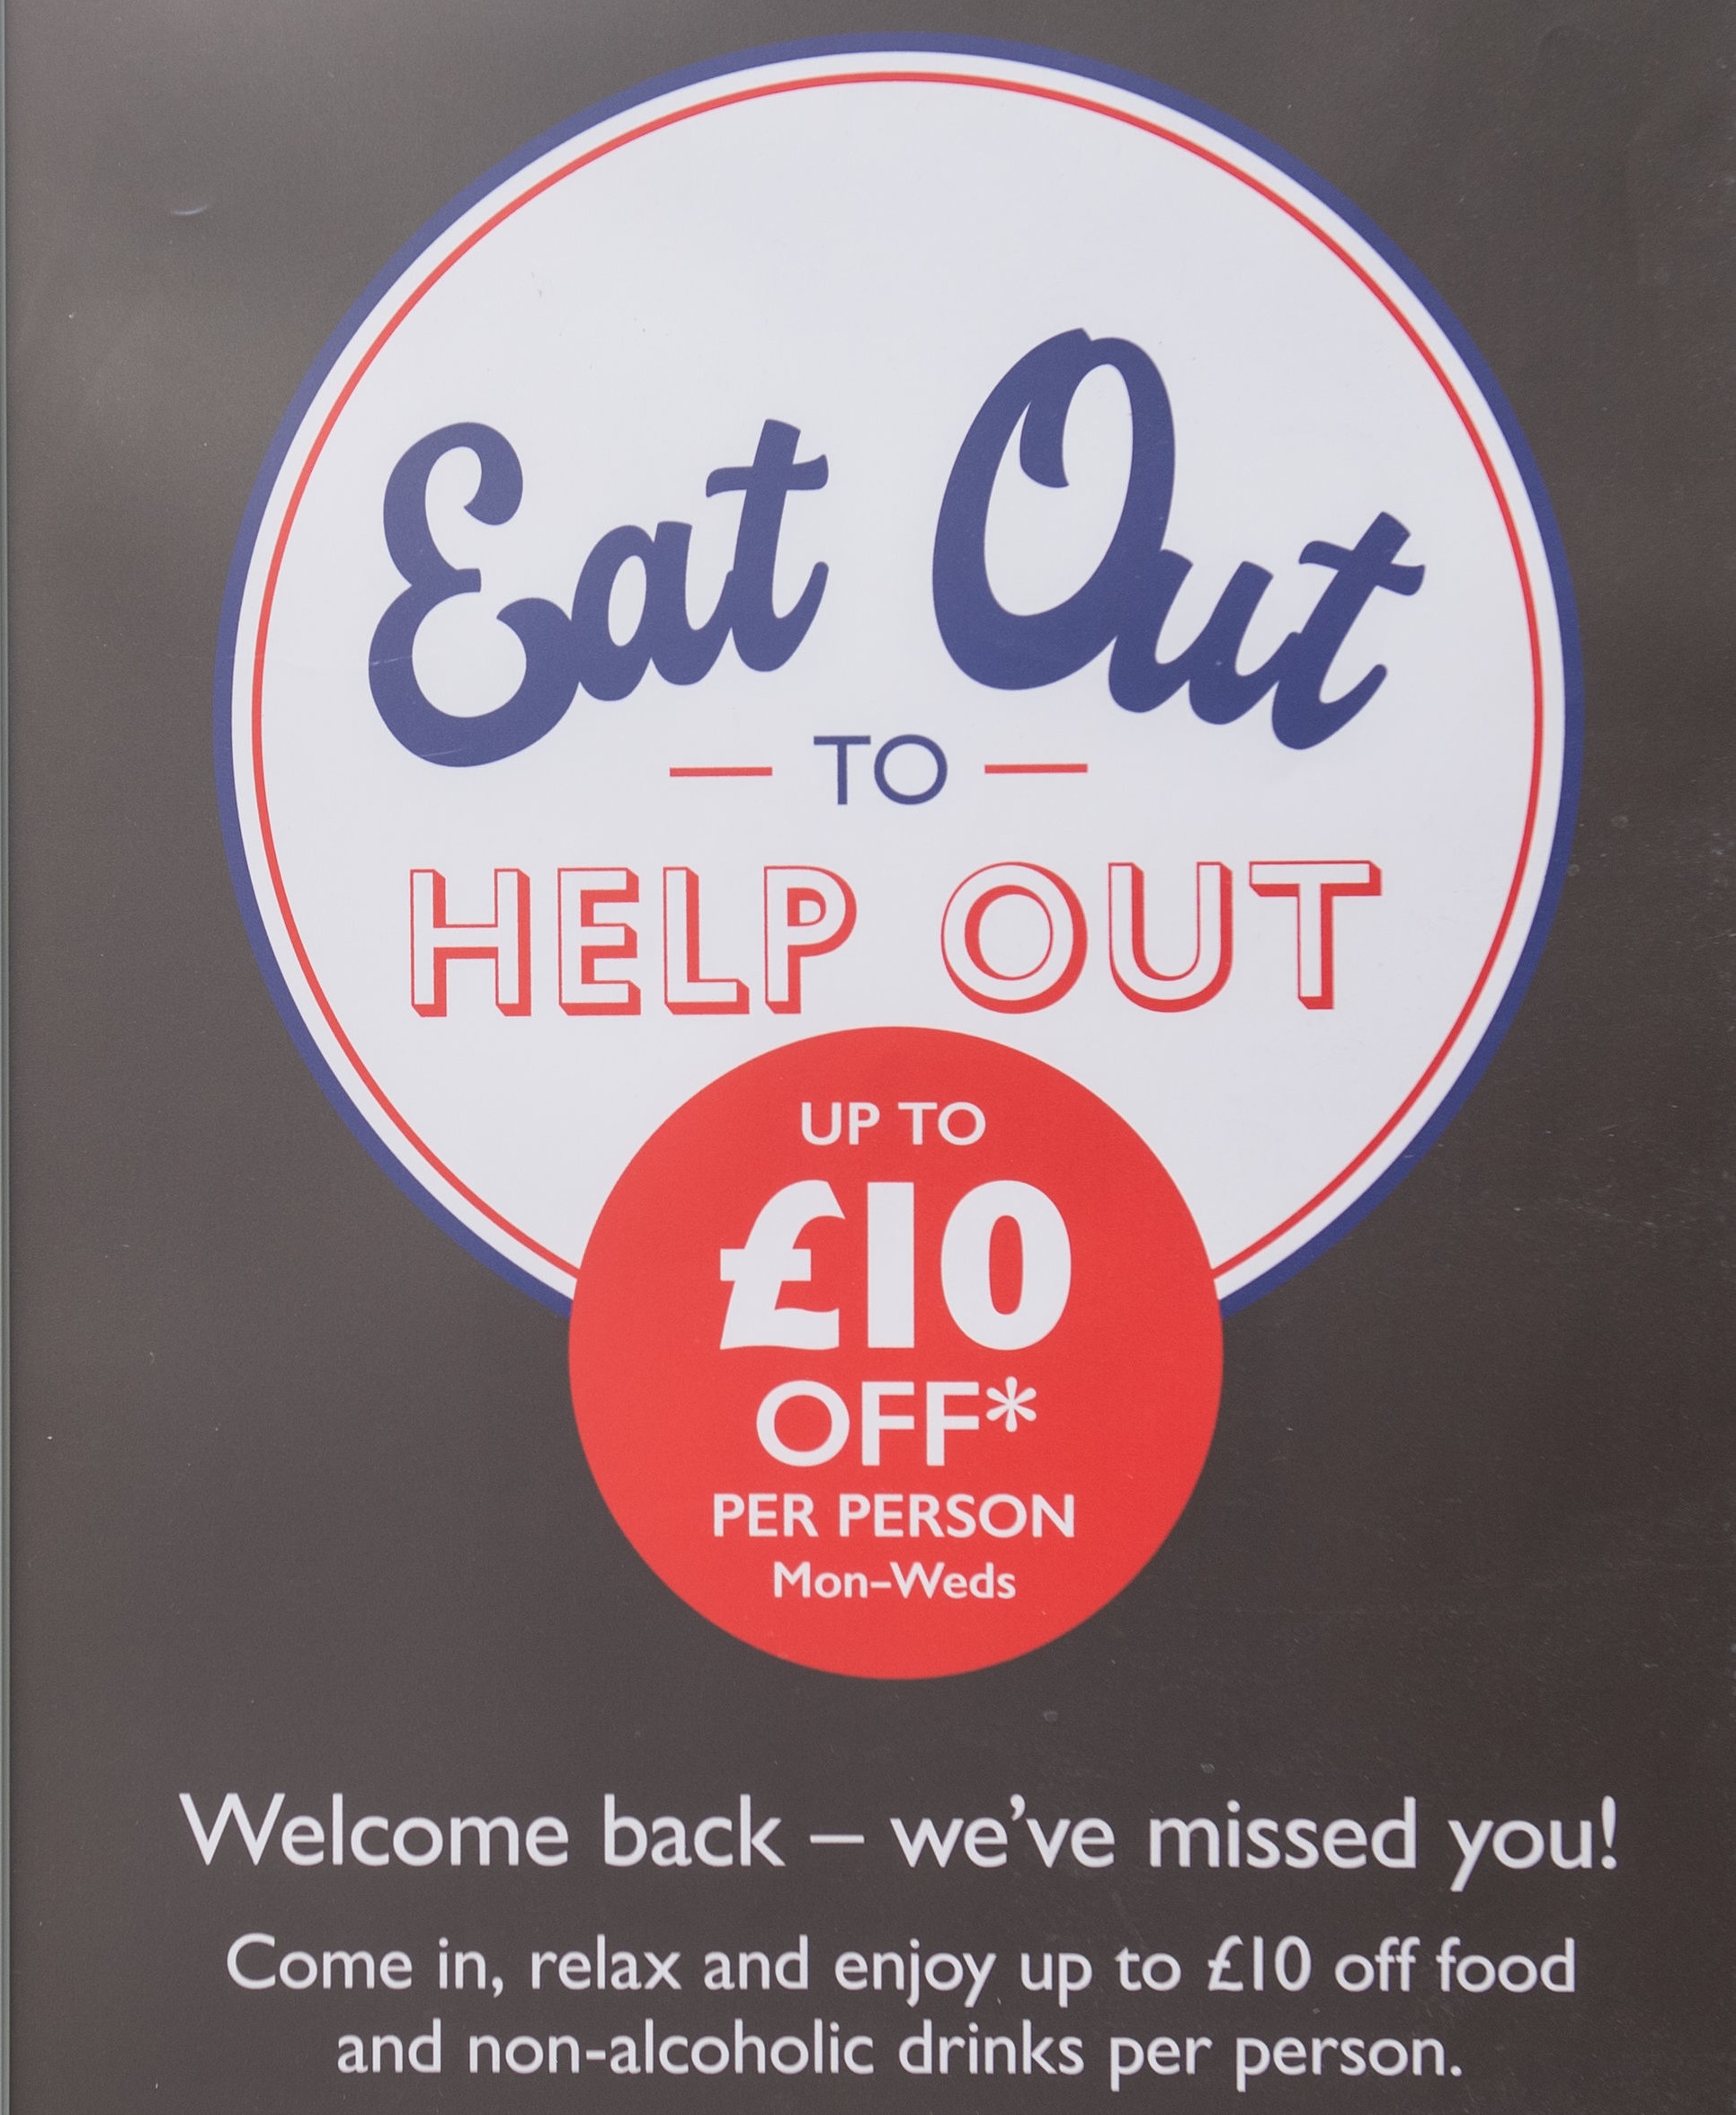 The Eat Out to Help Out sign